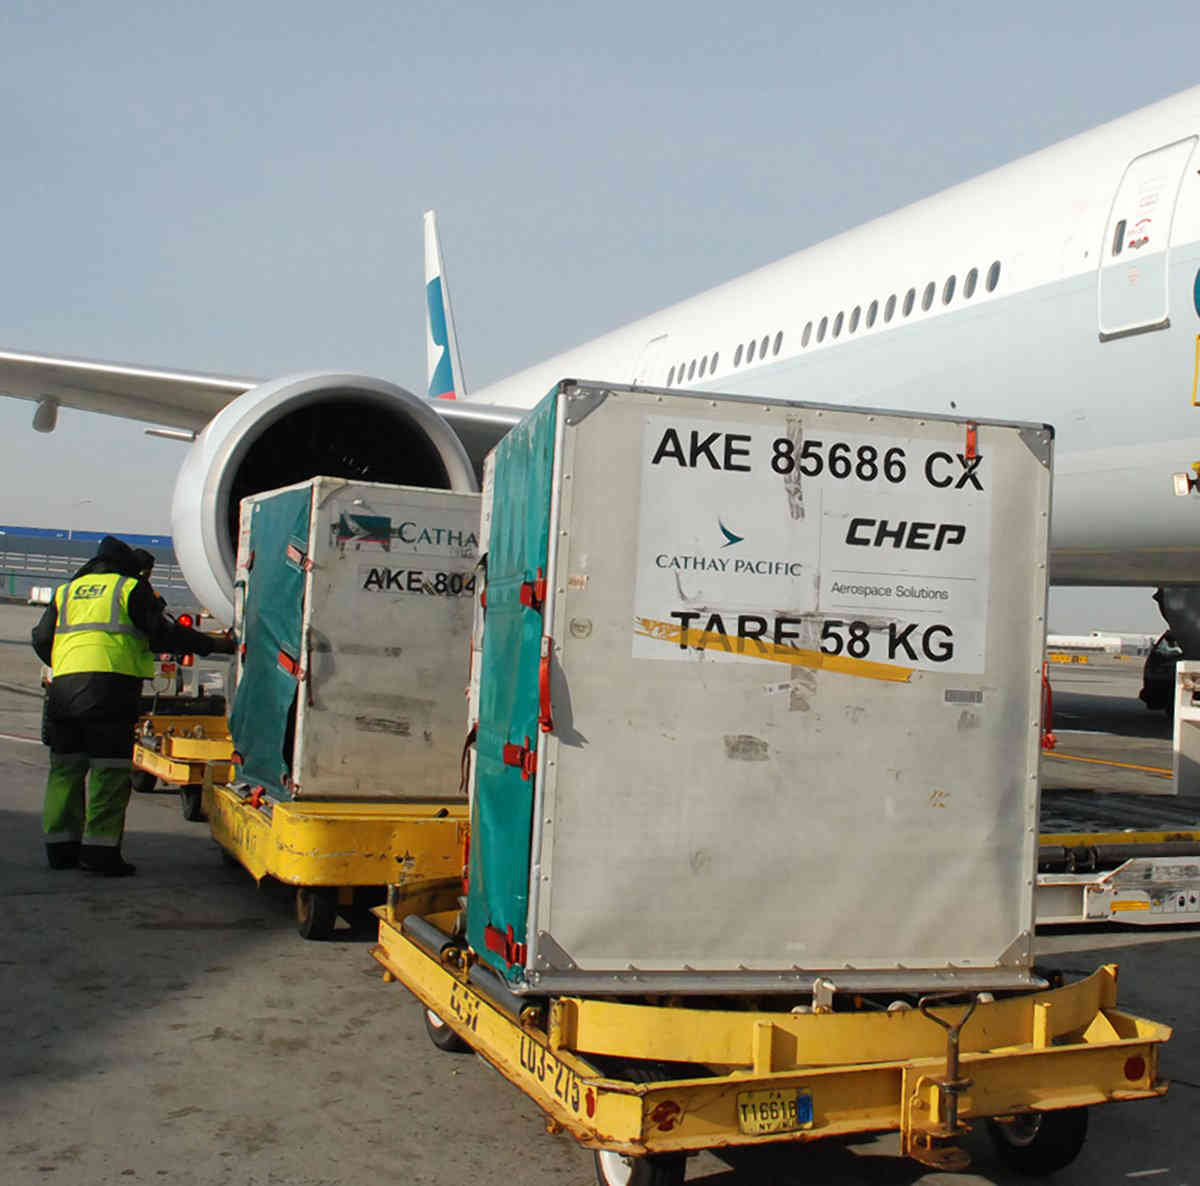 Cargo Briefs: News from the cargo industry